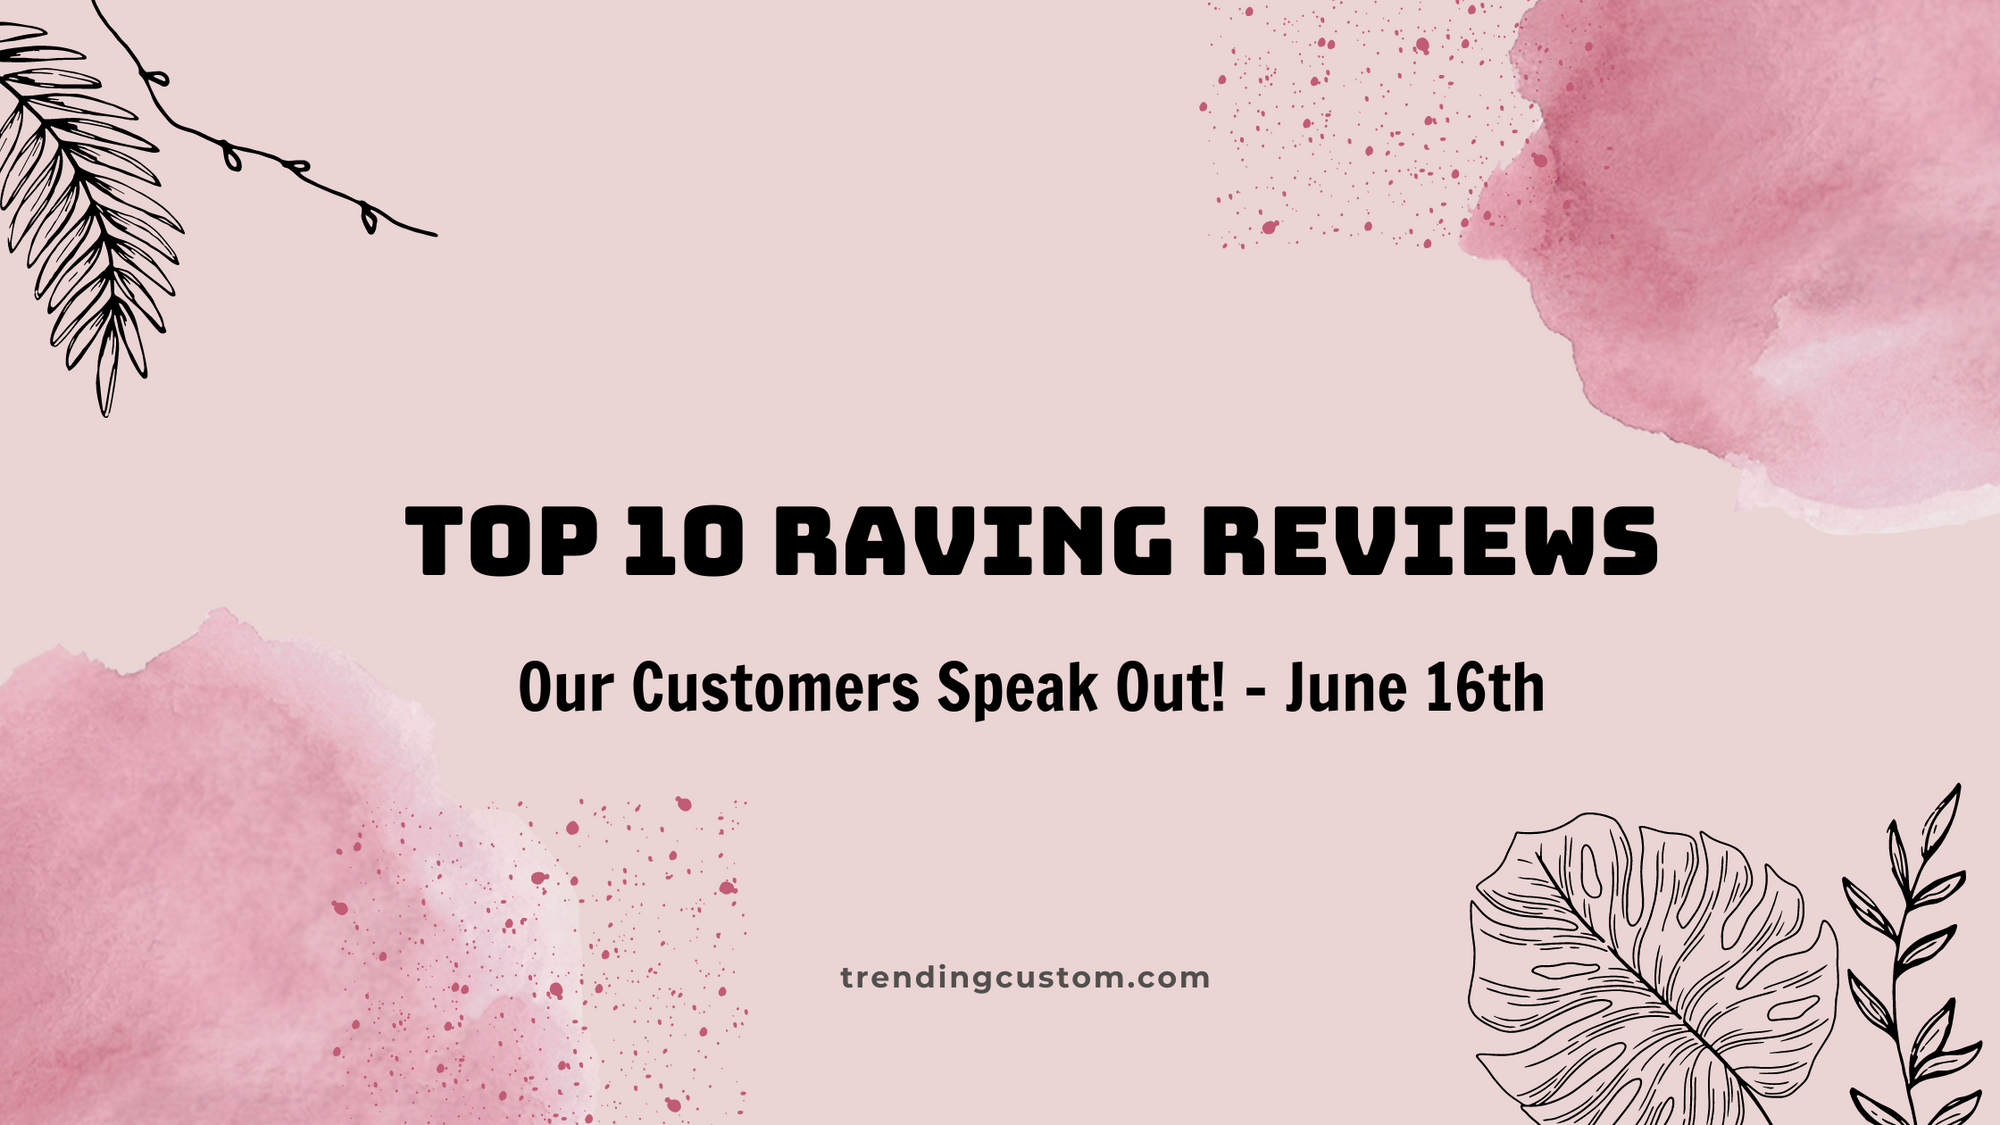 Top 10 Raving Reviews: Our Customers Speak Out! - June 16th